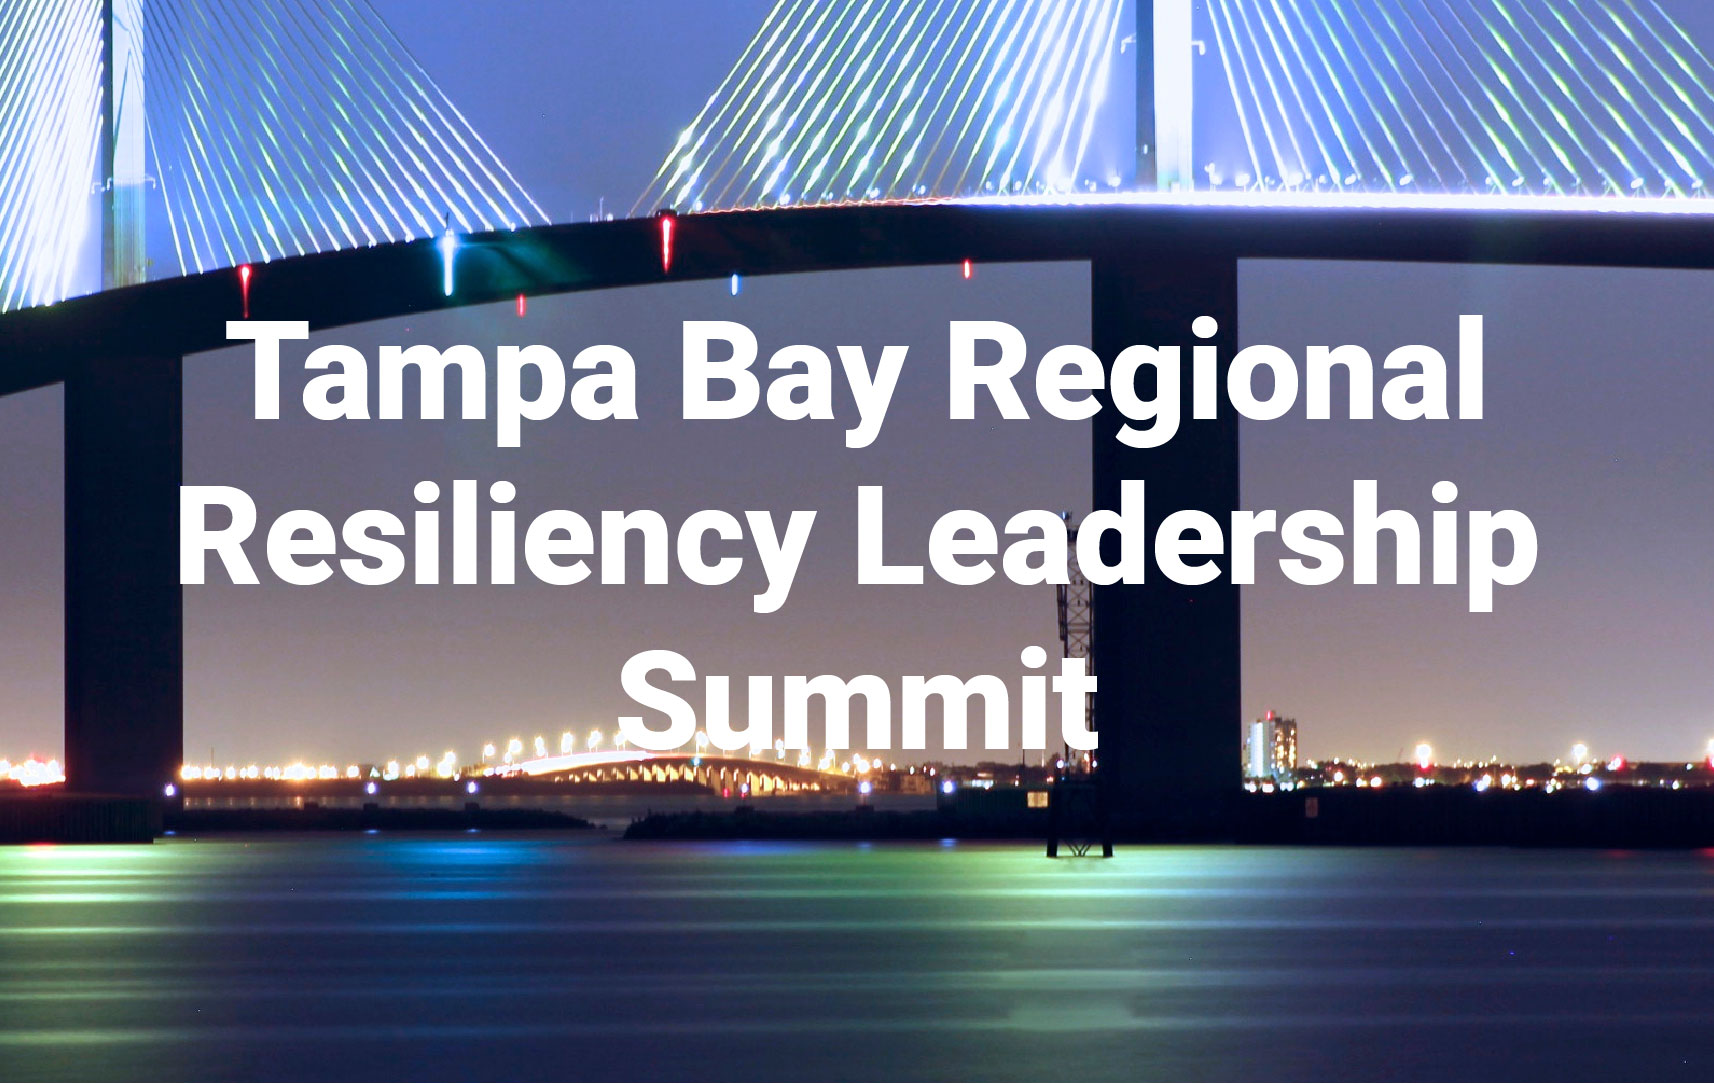 Tampa Bay Regional Resiliency Leadership Summit to feature insights from two coastal mayors